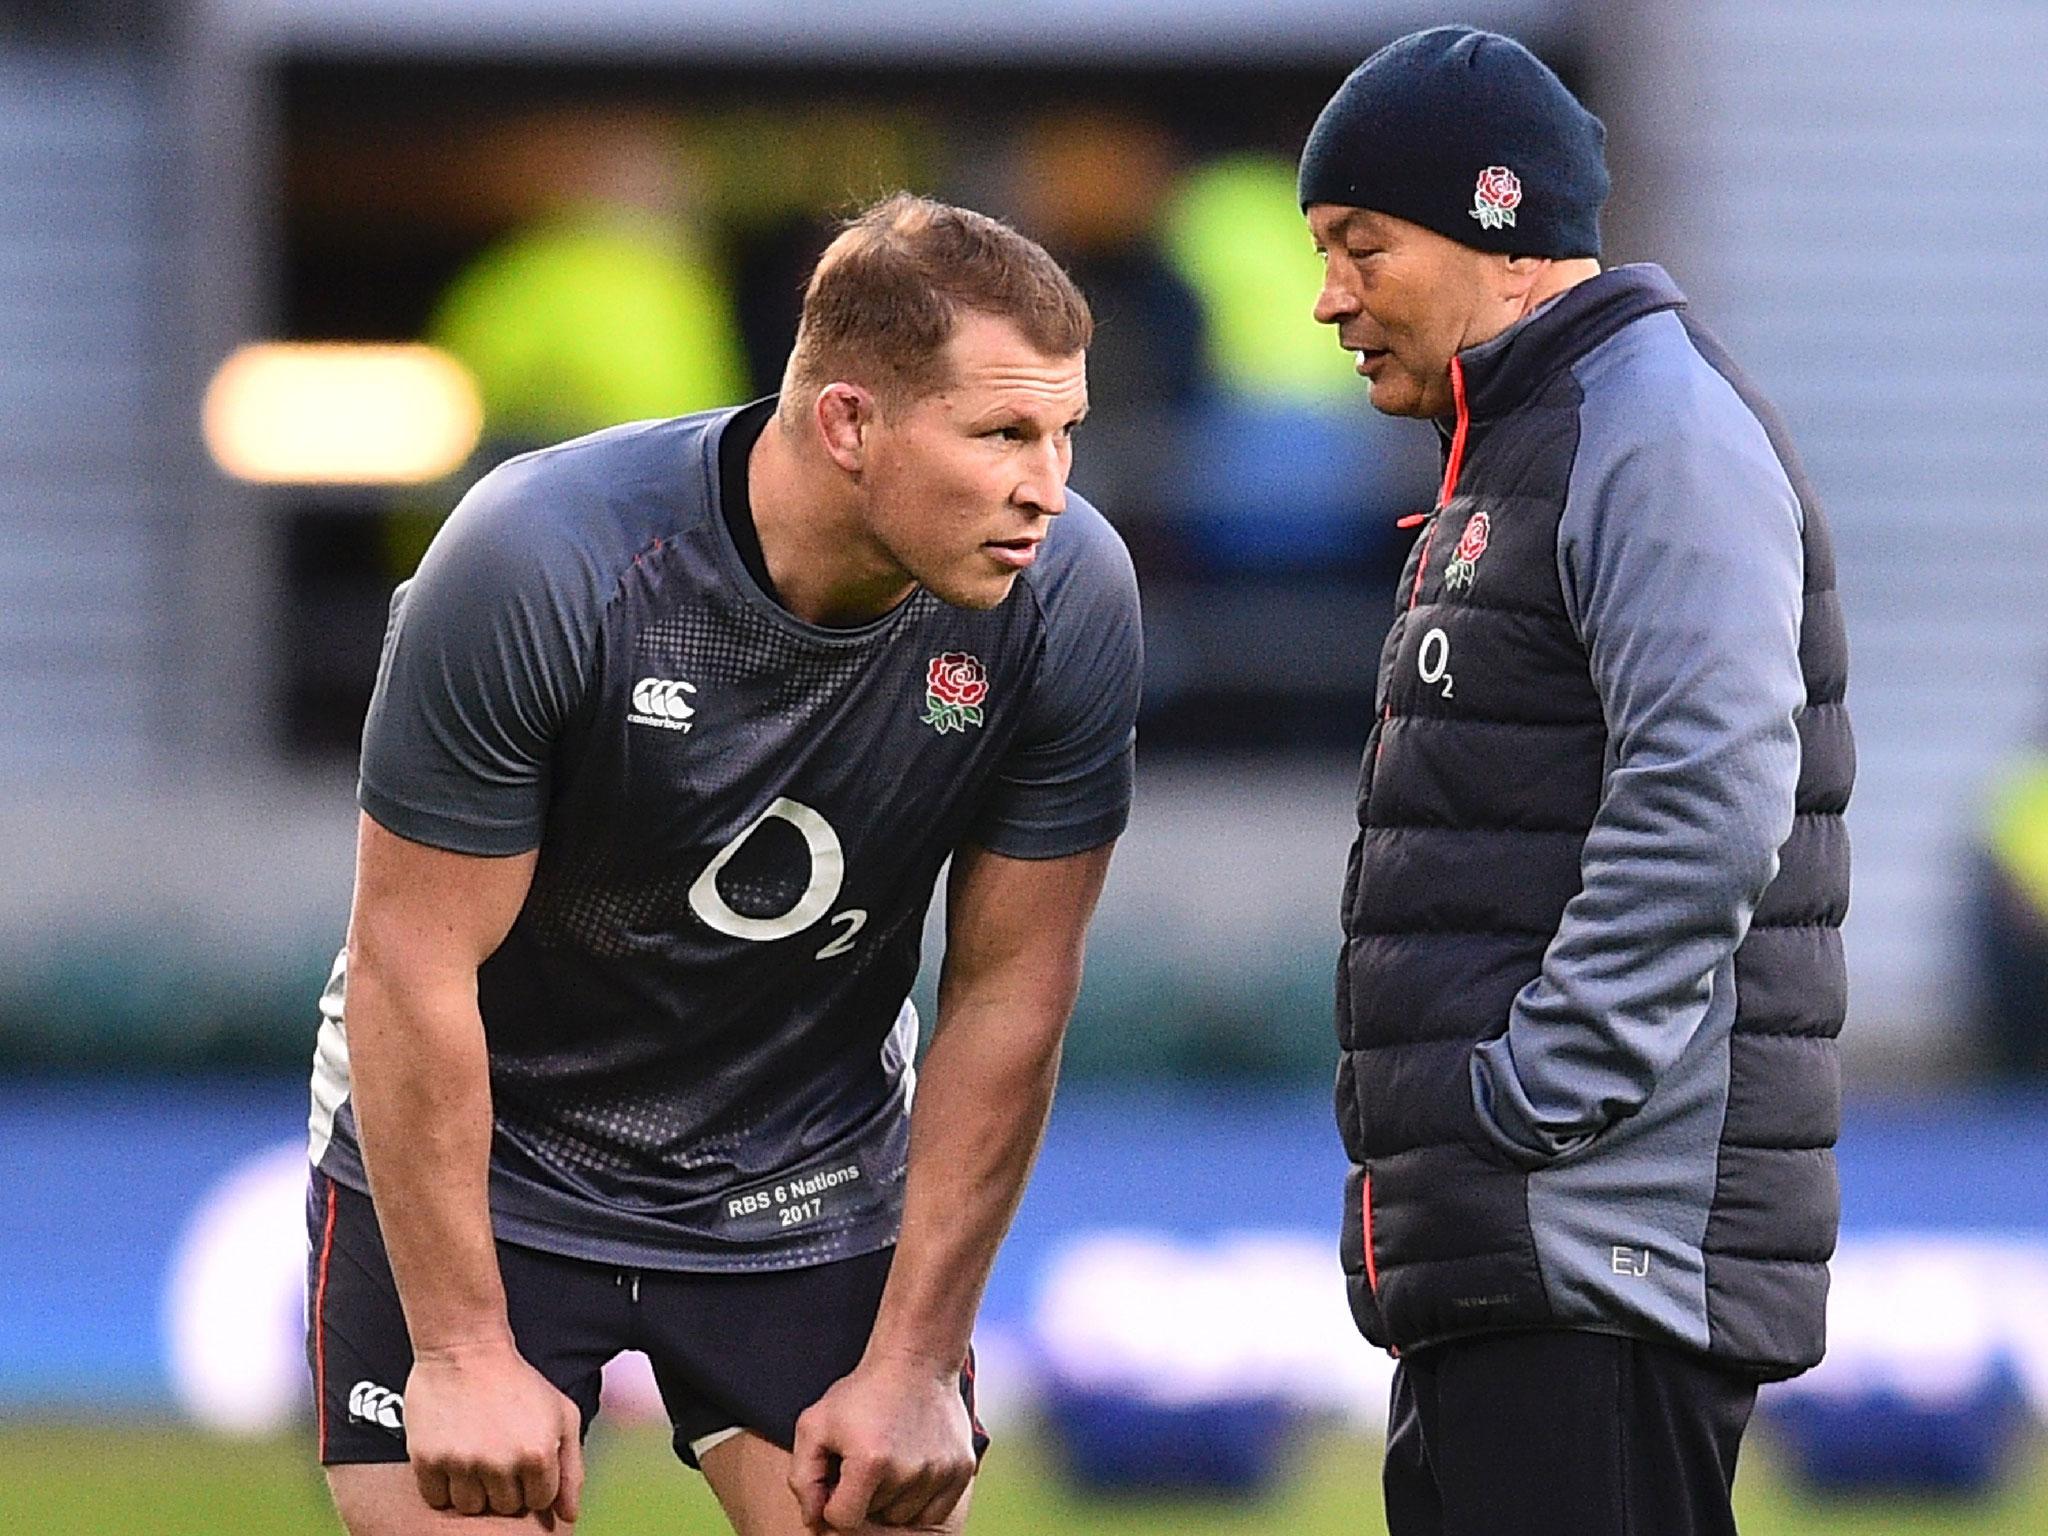 Eddie Jones has said he will get rid of England's fear of playing in Wales